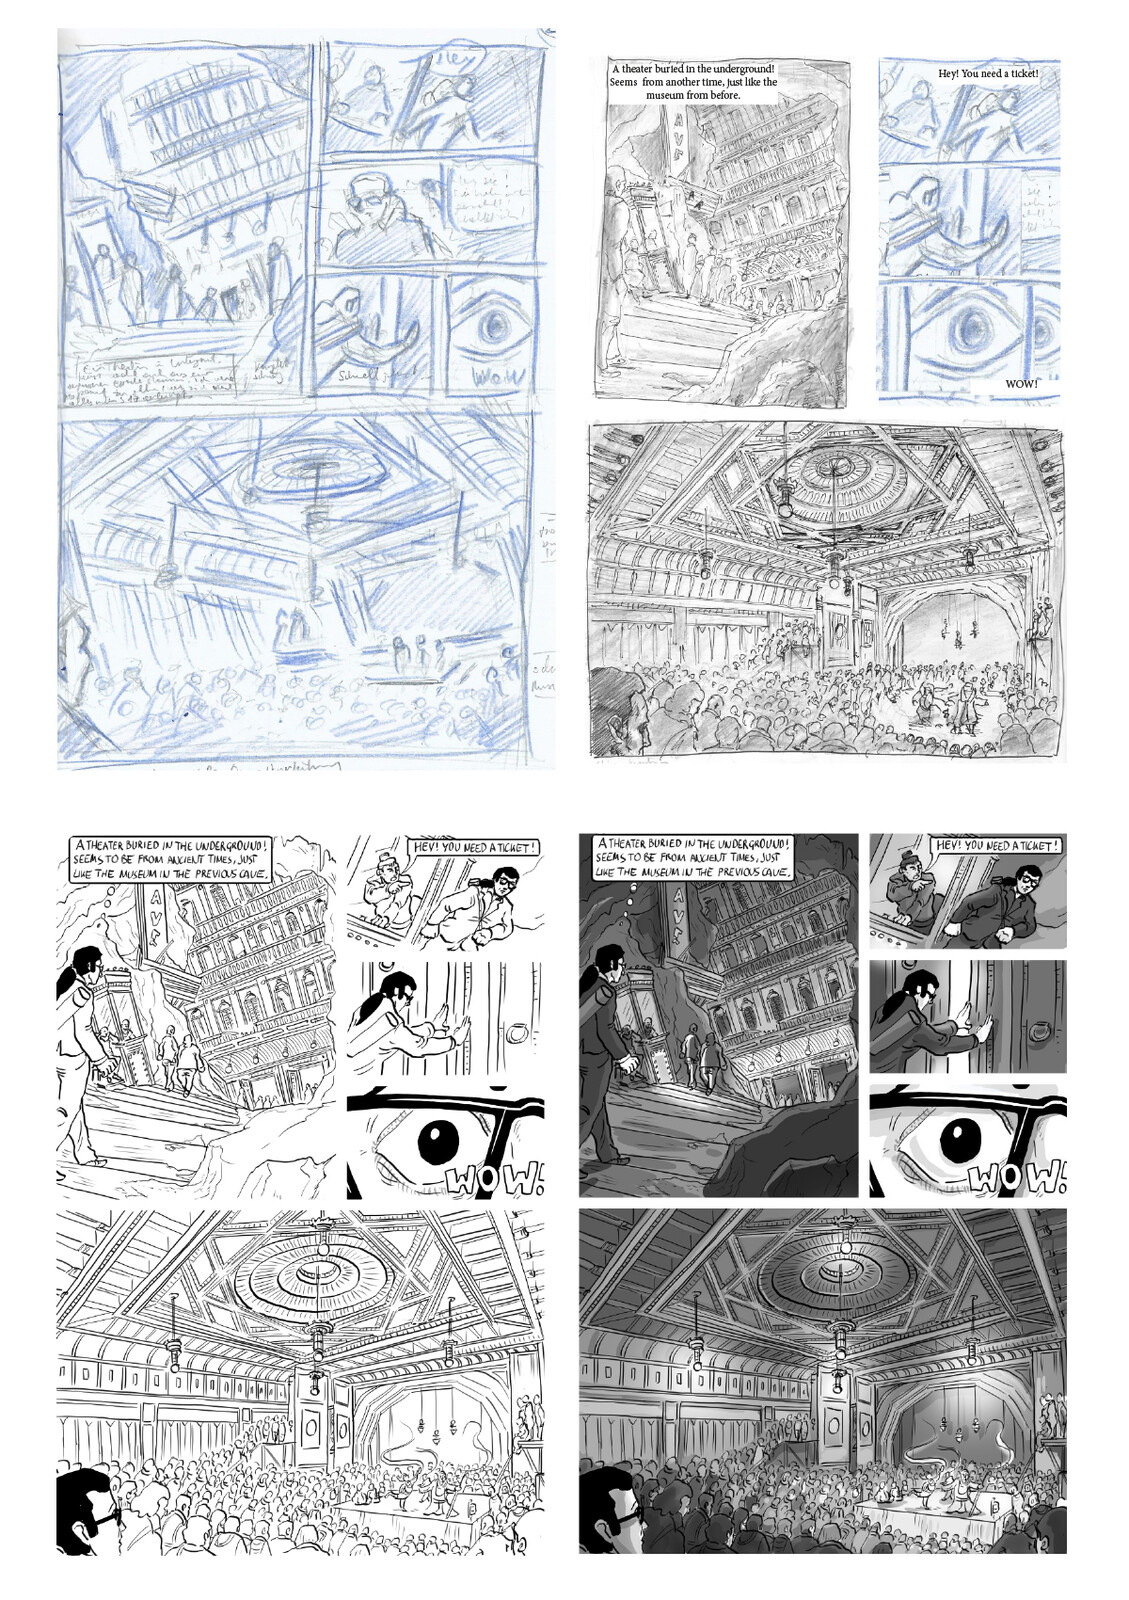 Process from rough pencil storyboard to inked and bw coloured page